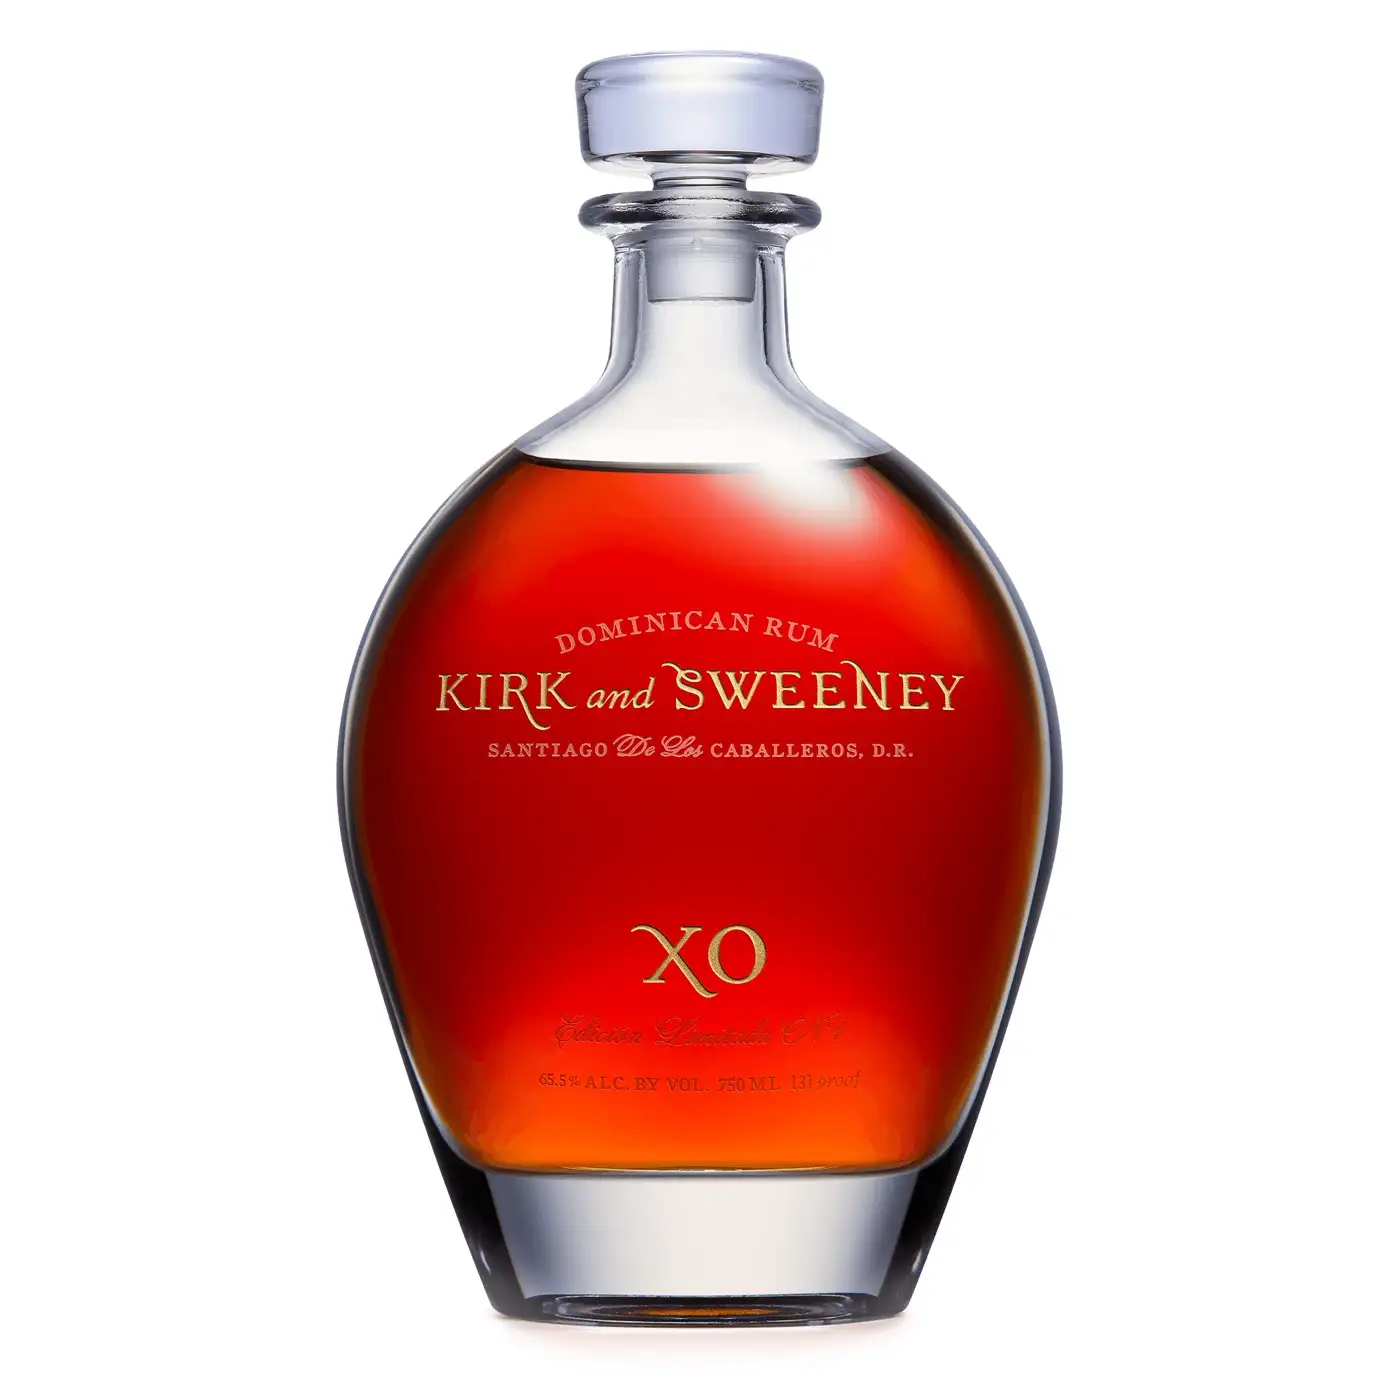 Image of the front of the bottle of the rum Kirk and Sweeney XO